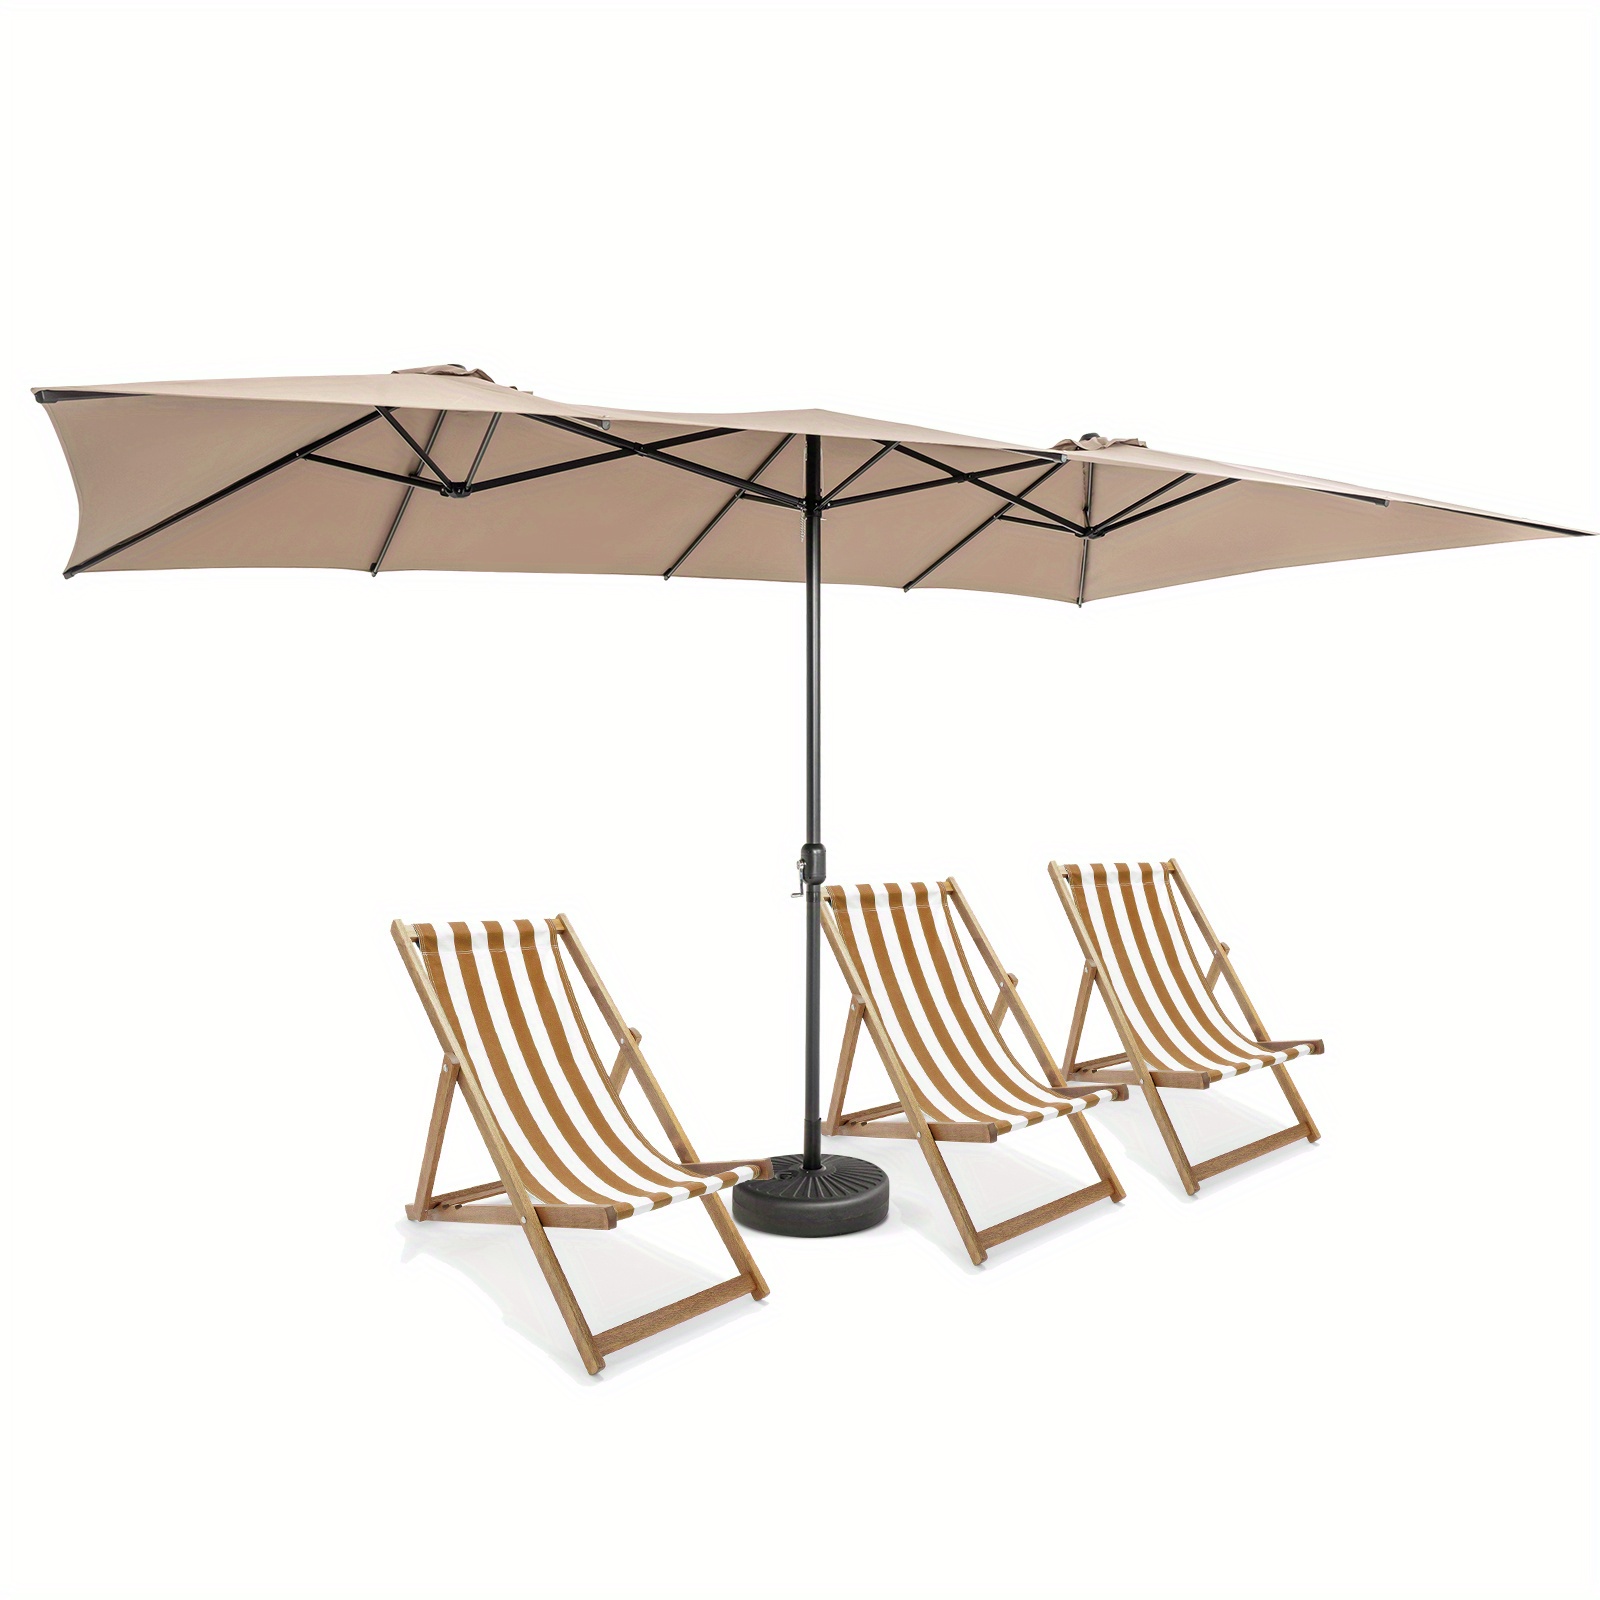 

15ft Double-sided Market Umbrella Large Crank Handle Vented Twin Patio Coffee